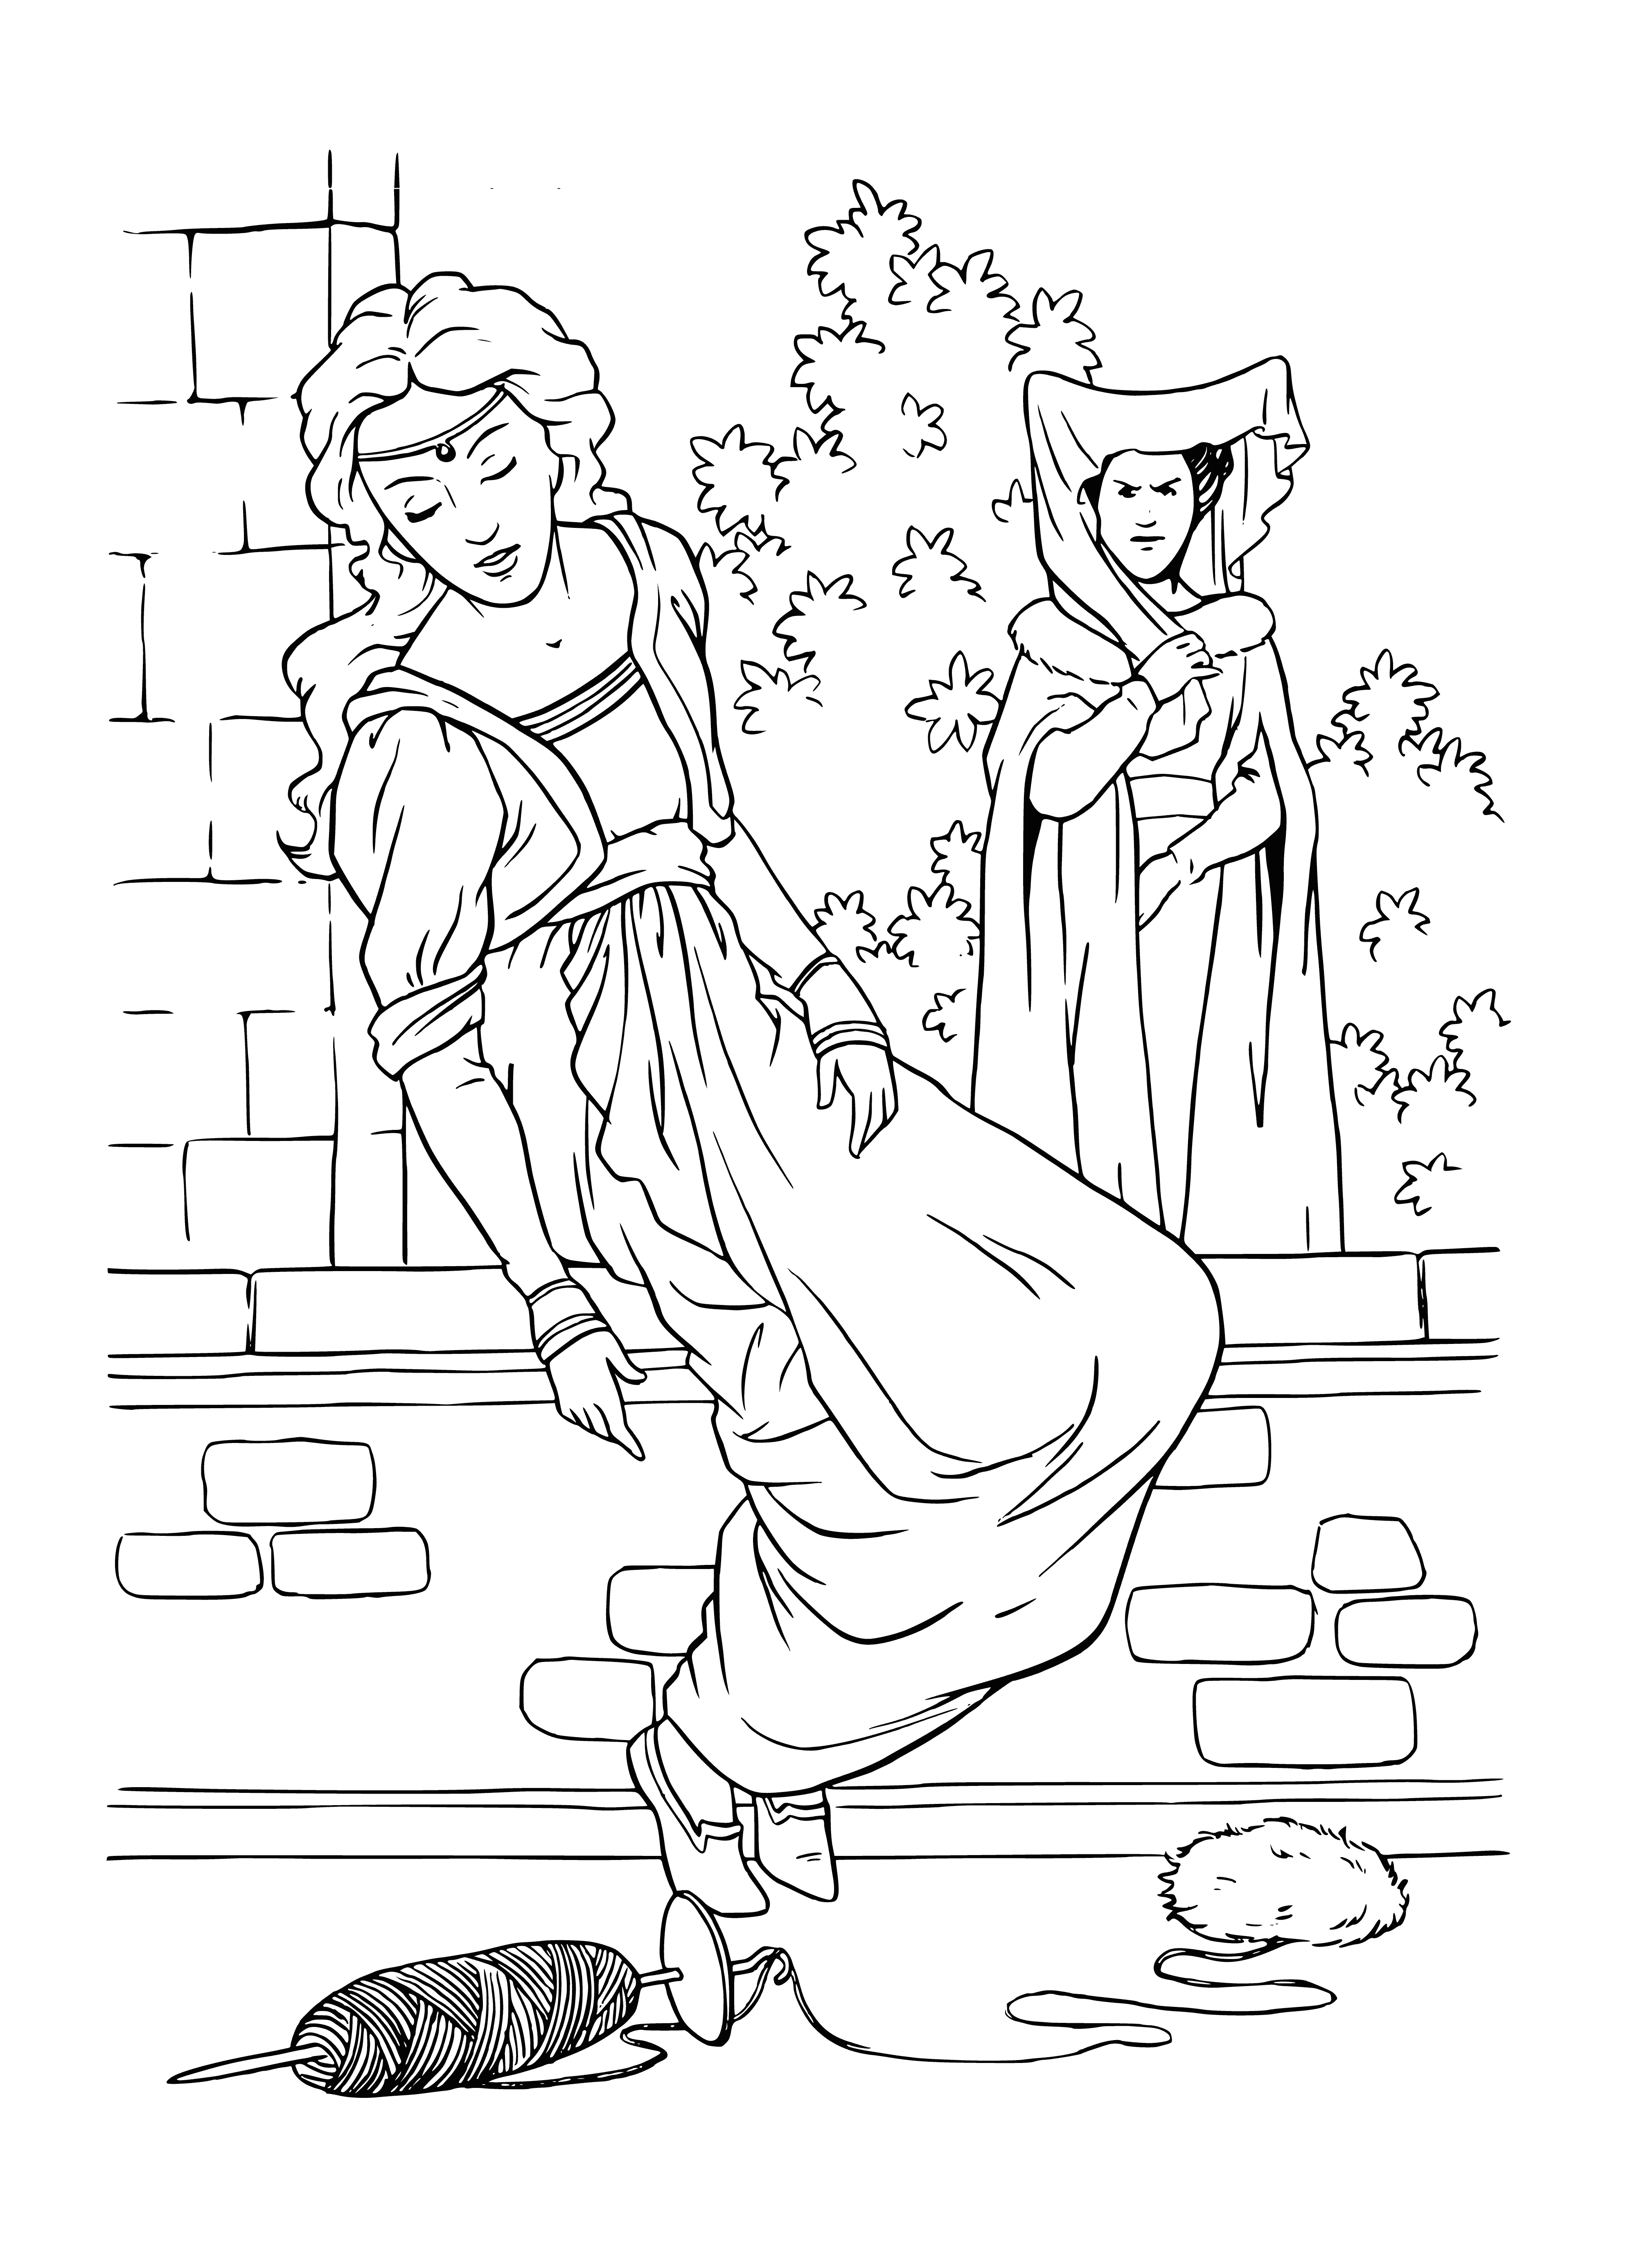 coloring page: Princess pricked her finger, shedding a tear and a drop of blood.